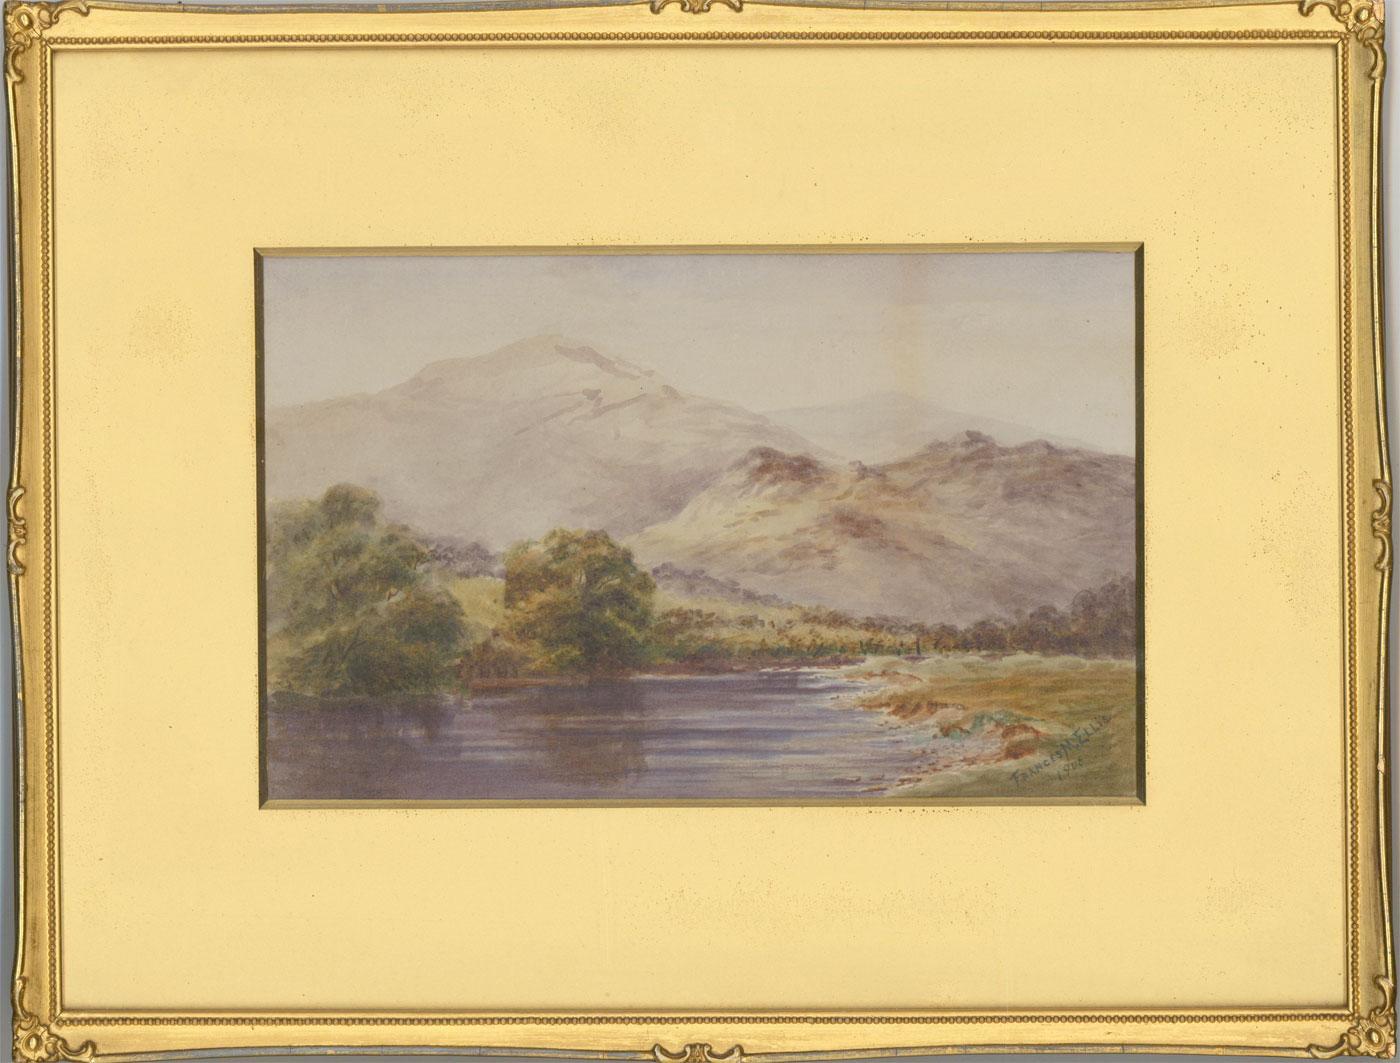 Wonderfully presented in an early 20th century gilt frame with gilt mount. Signed and dated. On watercolour paper.
